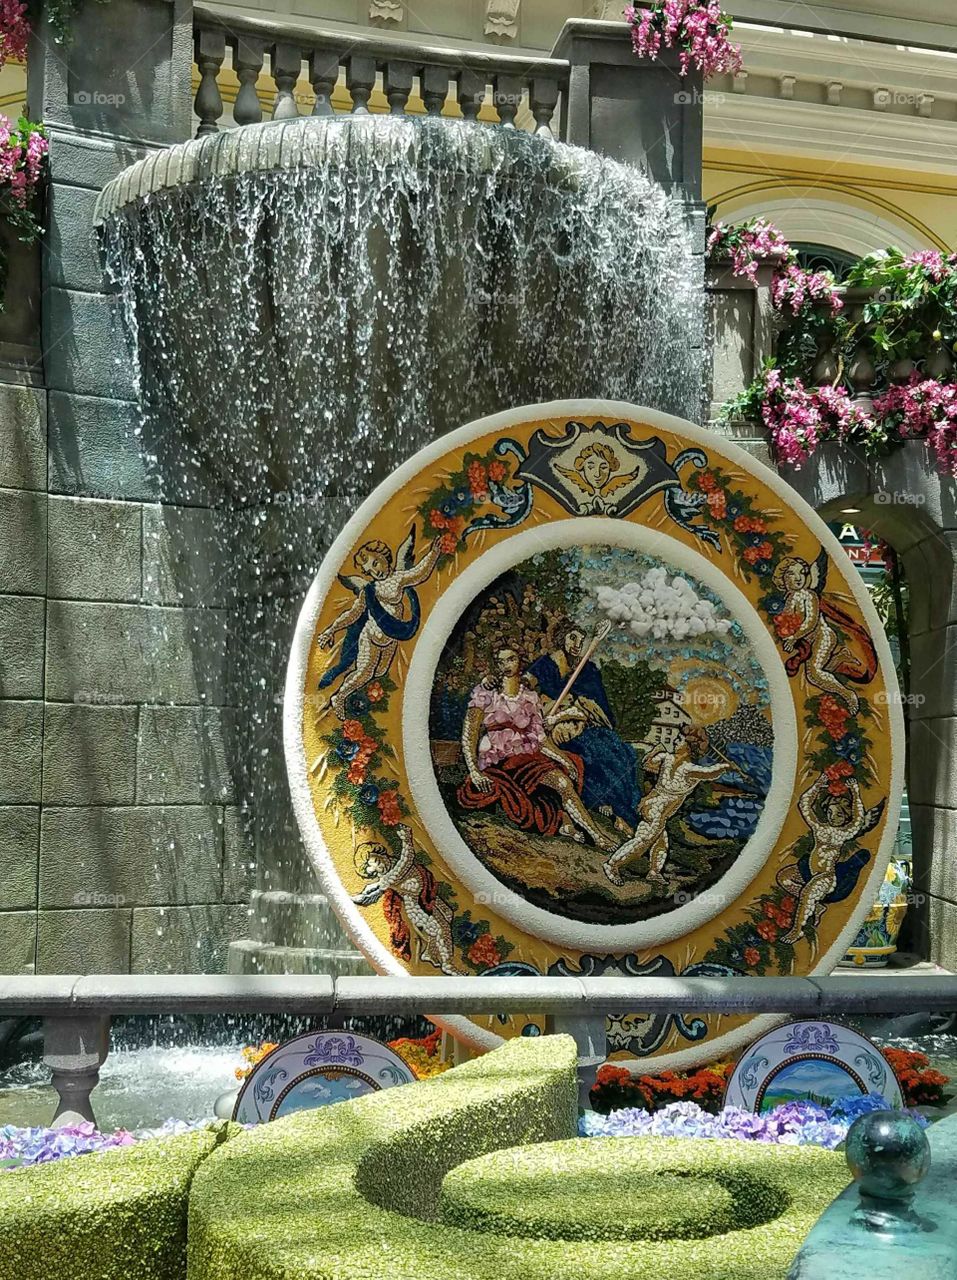 waterfall with the large plate made out of flowers